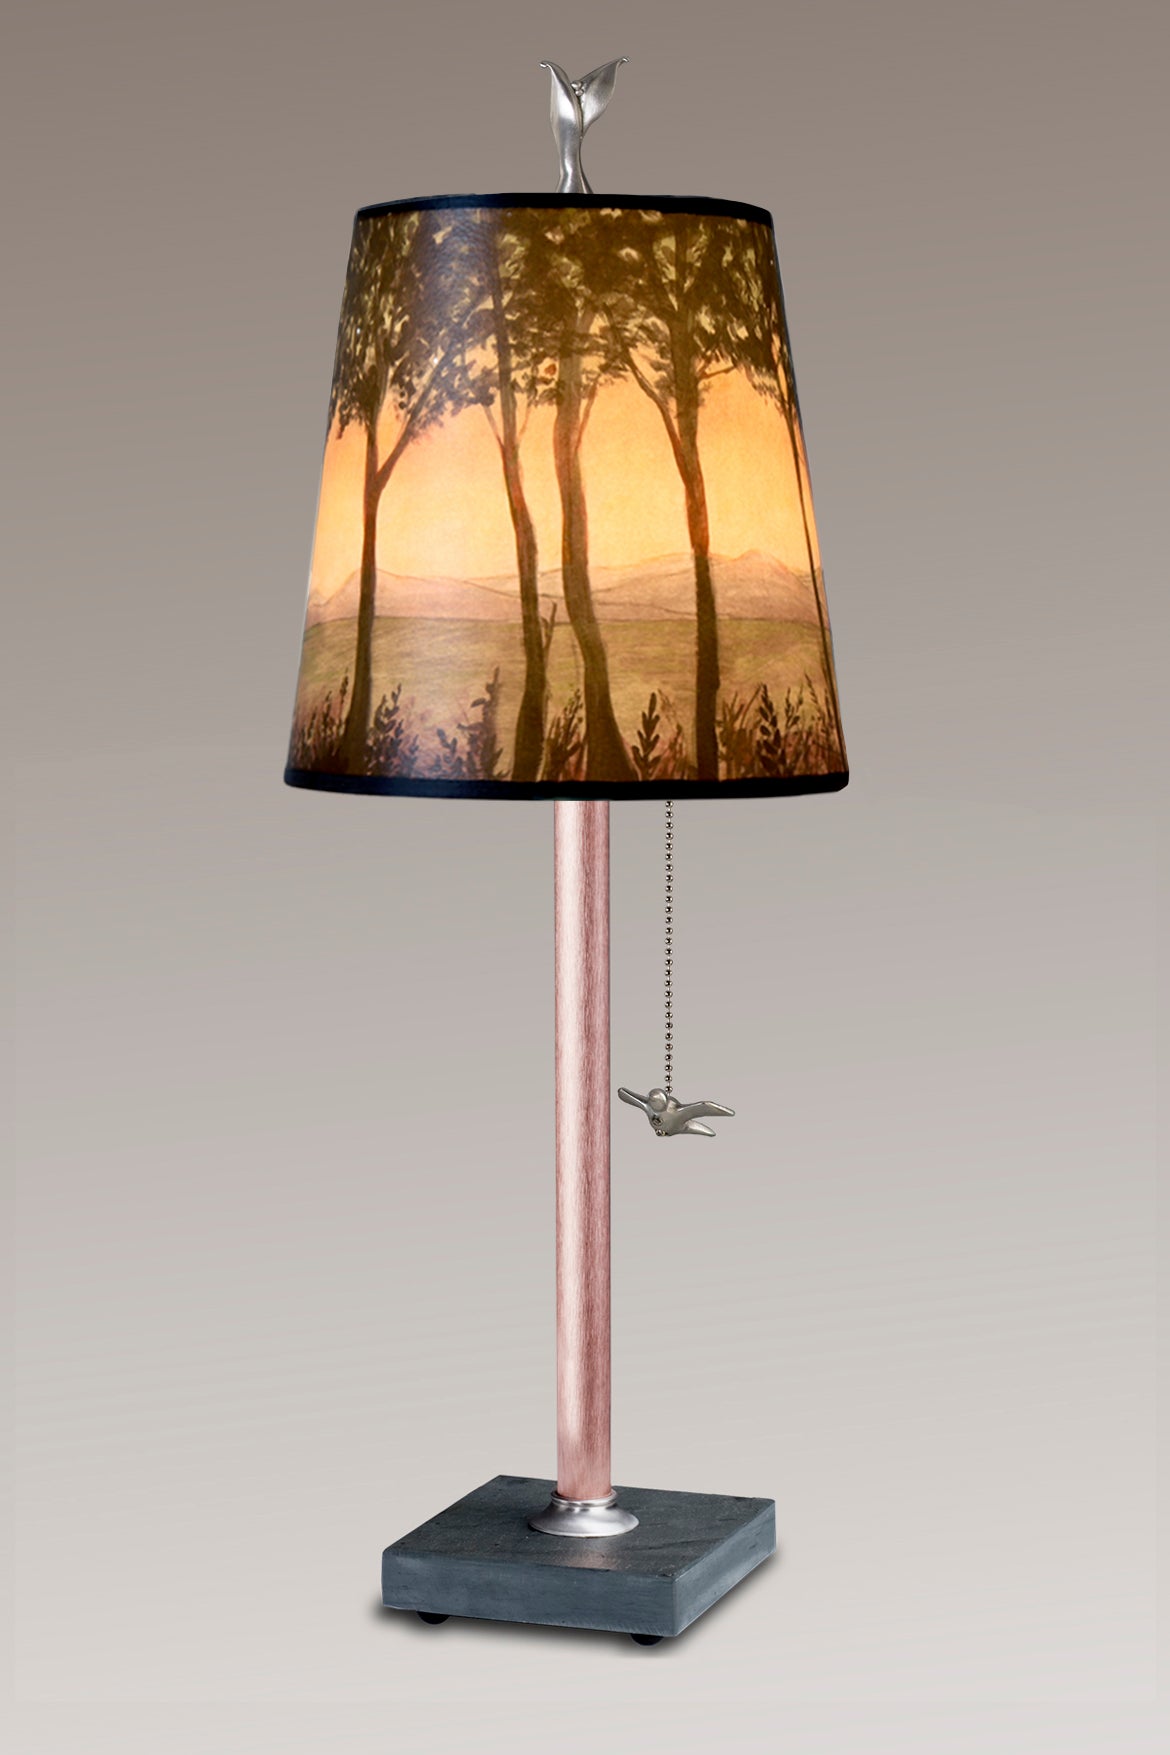 Janna Ugone & Co Table Lamps Copper Table Lamp with Small Drum Shade in Dawn